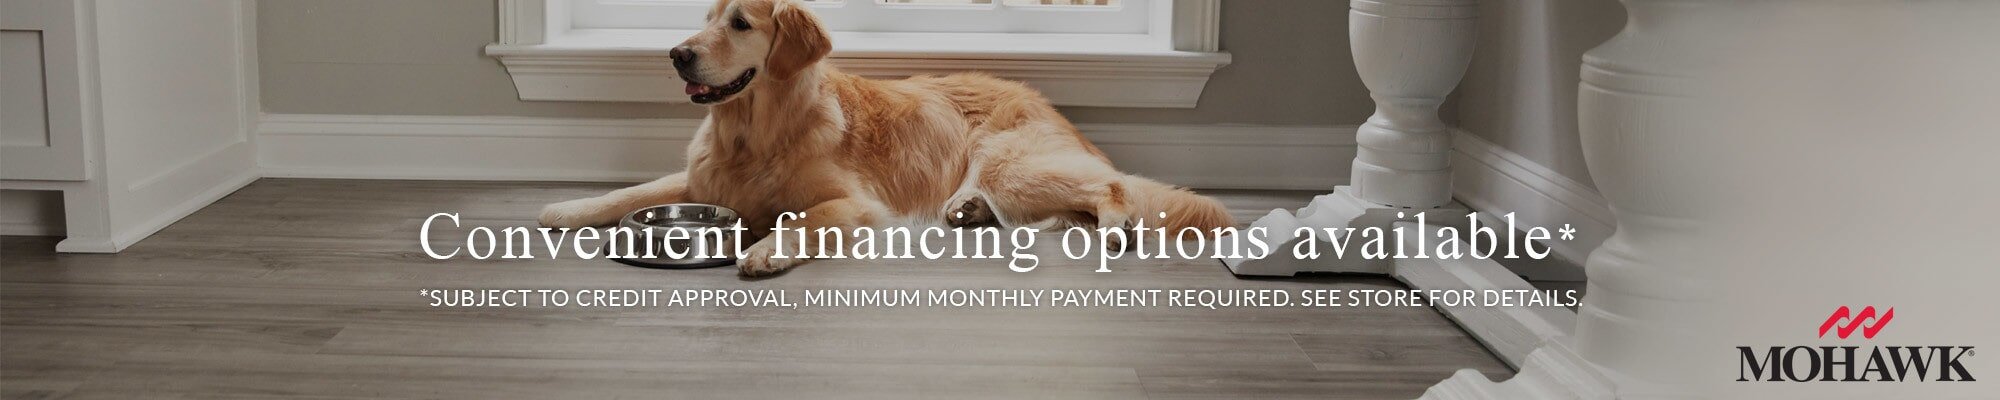 Convenient financing options available. Subject to credit approval.